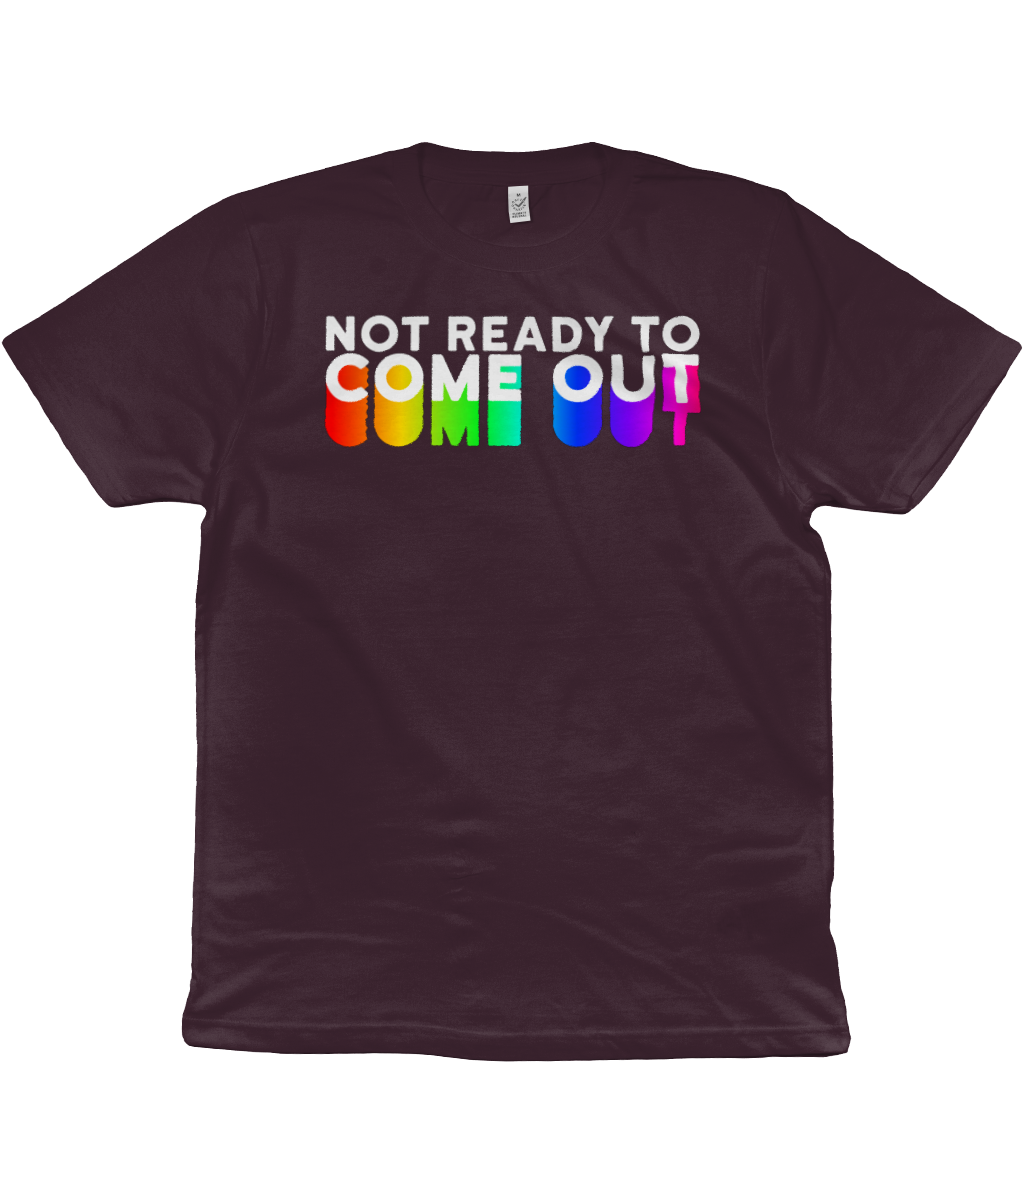 Not Ready to Come Out Organic Cotton T-Shirt